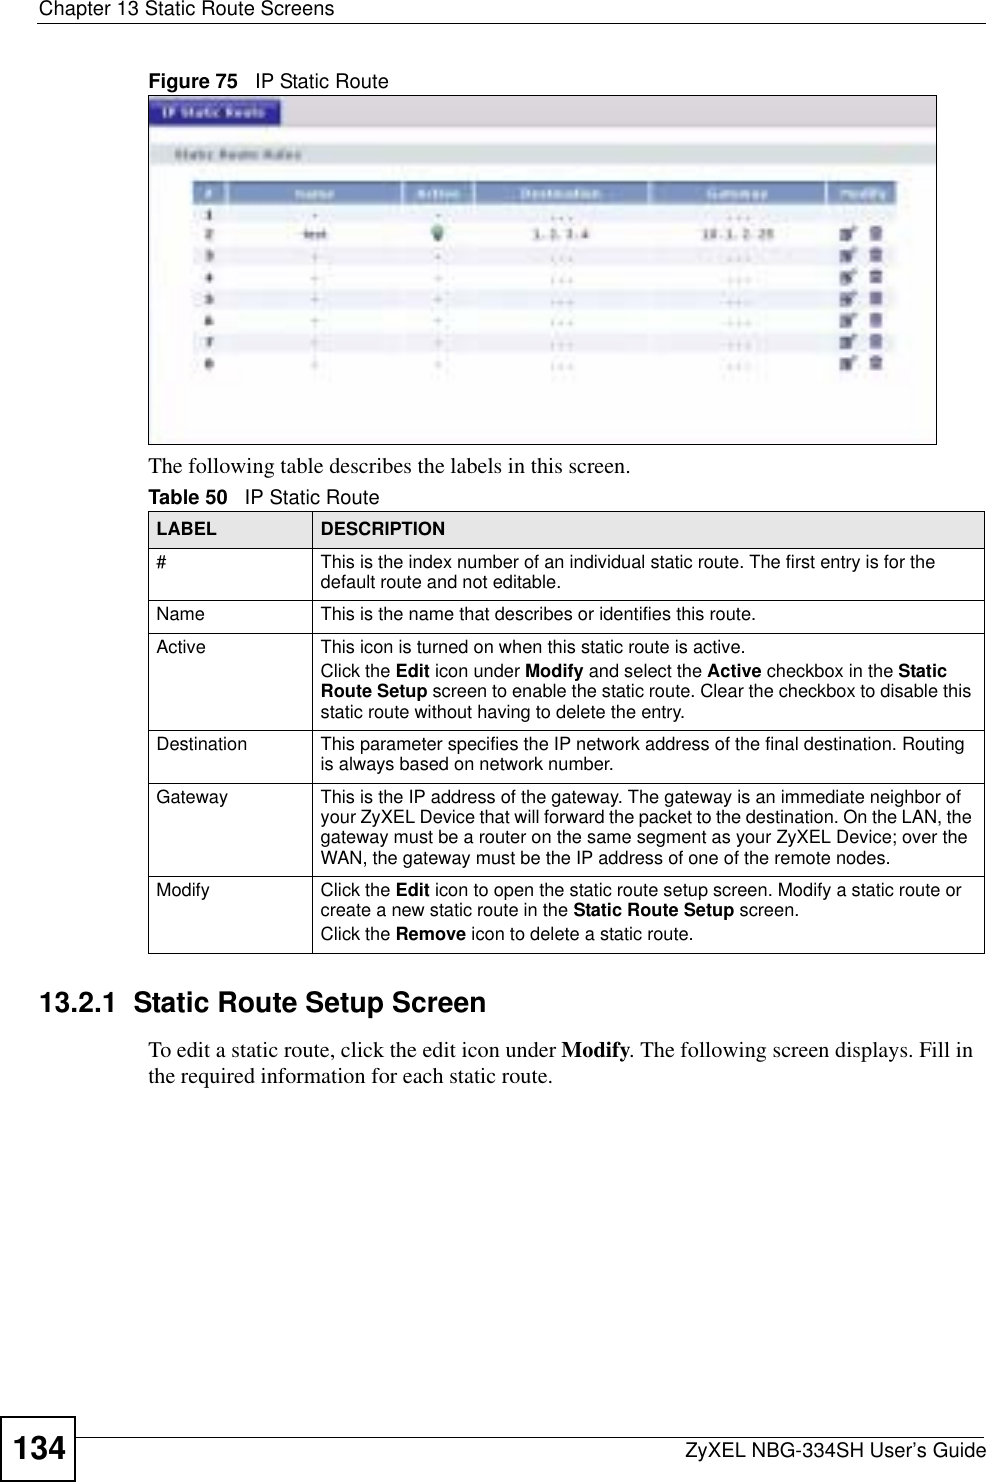 Chapter 13 Static Route ScreensZyXEL NBG-334SH User’s Guide134Figure 75   IP Static RouteThe following table describes the labels in this screen.13.2.1  Static Route Setup ScreenTo edit a static route, click the edit icon under Modify. The following screen displays. Fill in the required information for each static route.Table 50   IP Static RouteLABEL DESCRIPTION#This is the index number of an individual static route. The first entry is for the default route and not editable.Name This is the name that describes or identifies this route. Active This icon is turned on when this static route is active.Click the Edit icon under Modify and select the Active checkbox in the Static Route Setup screen to enable the static route. Clear the checkbox to disable this static route without having to delete the entry.Destination This parameter specifies the IP network address of the final destination. Routing is always based on network number. Gateway This is the IP address of the gateway. The gateway is an immediate neighbor of your ZyXEL Device that will forward the packet to the destination. On the LAN, the gateway must be a router on the same segment as your ZyXEL Device; over the WAN, the gateway must be the IP address of one of the remote nodes.Modify Click the Edit icon to open the static route setup screen. Modify a static route or create a new static route in the Static Route Setup screen.Click the Remove icon to delete a static route.